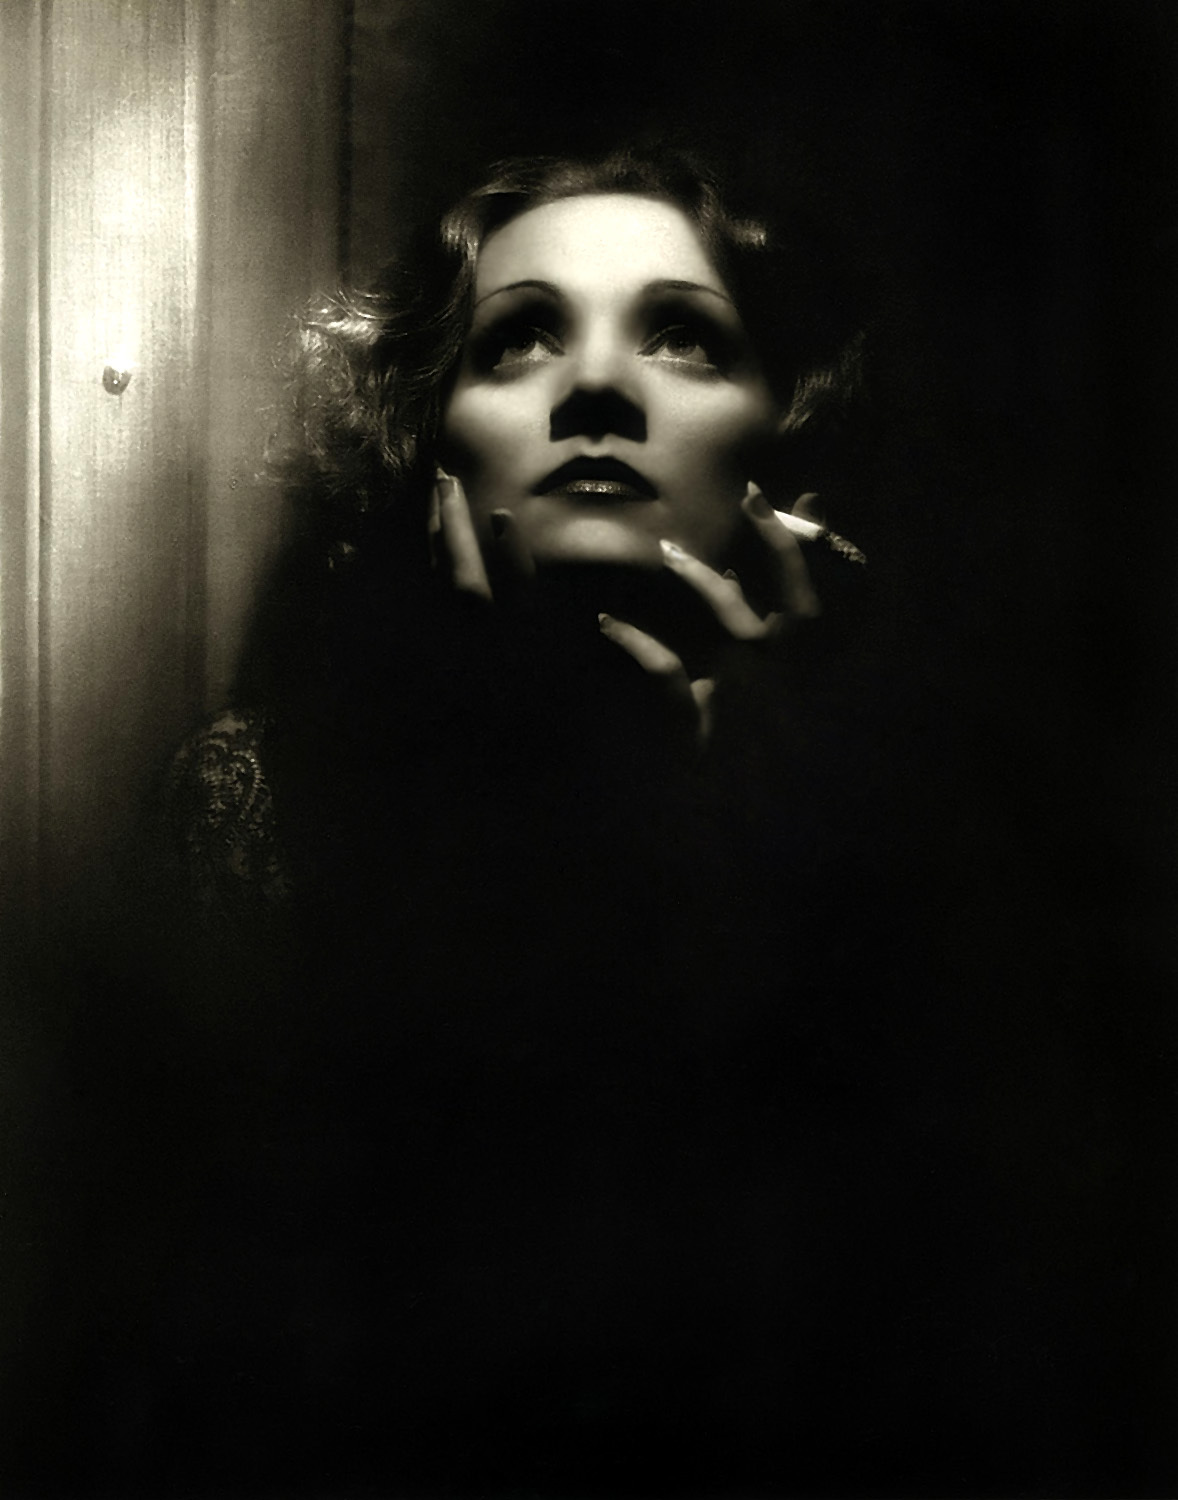 36 Marlene Dietrich Wallpapers On Wallpapersafari Images, Photos, Reviews